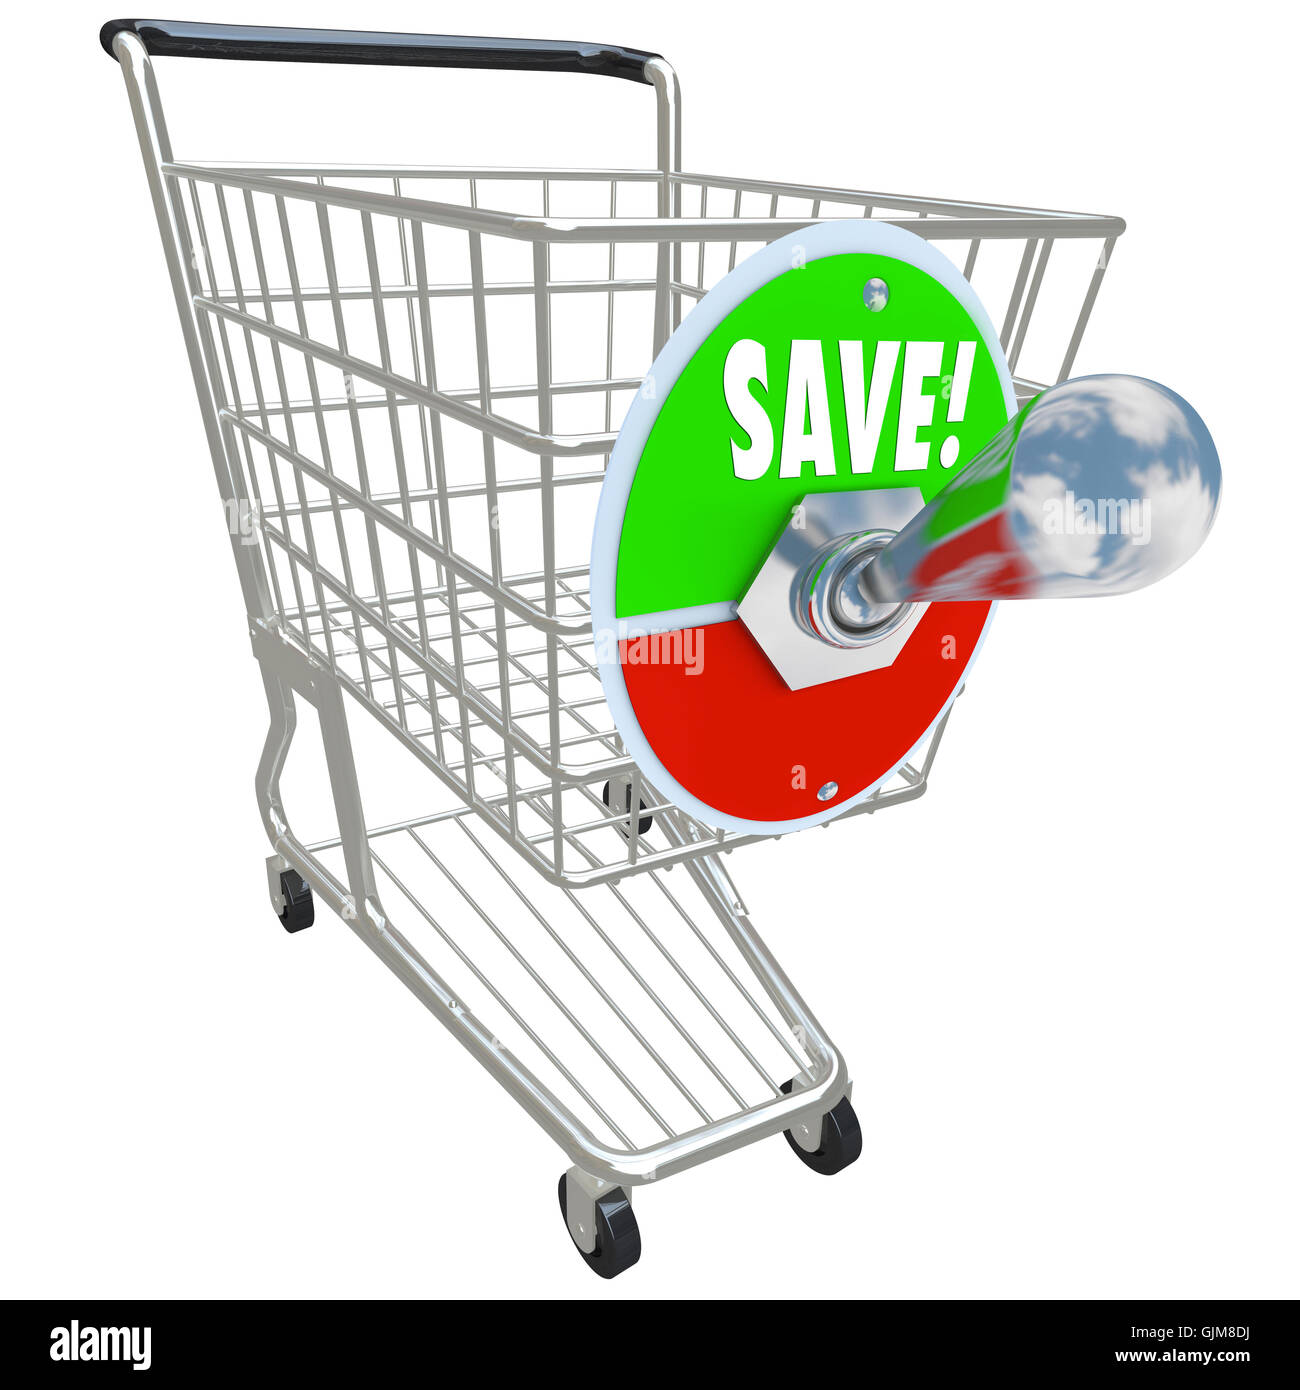 Shopping Cart with Sale Switch for Maximum Savings Stock Photo